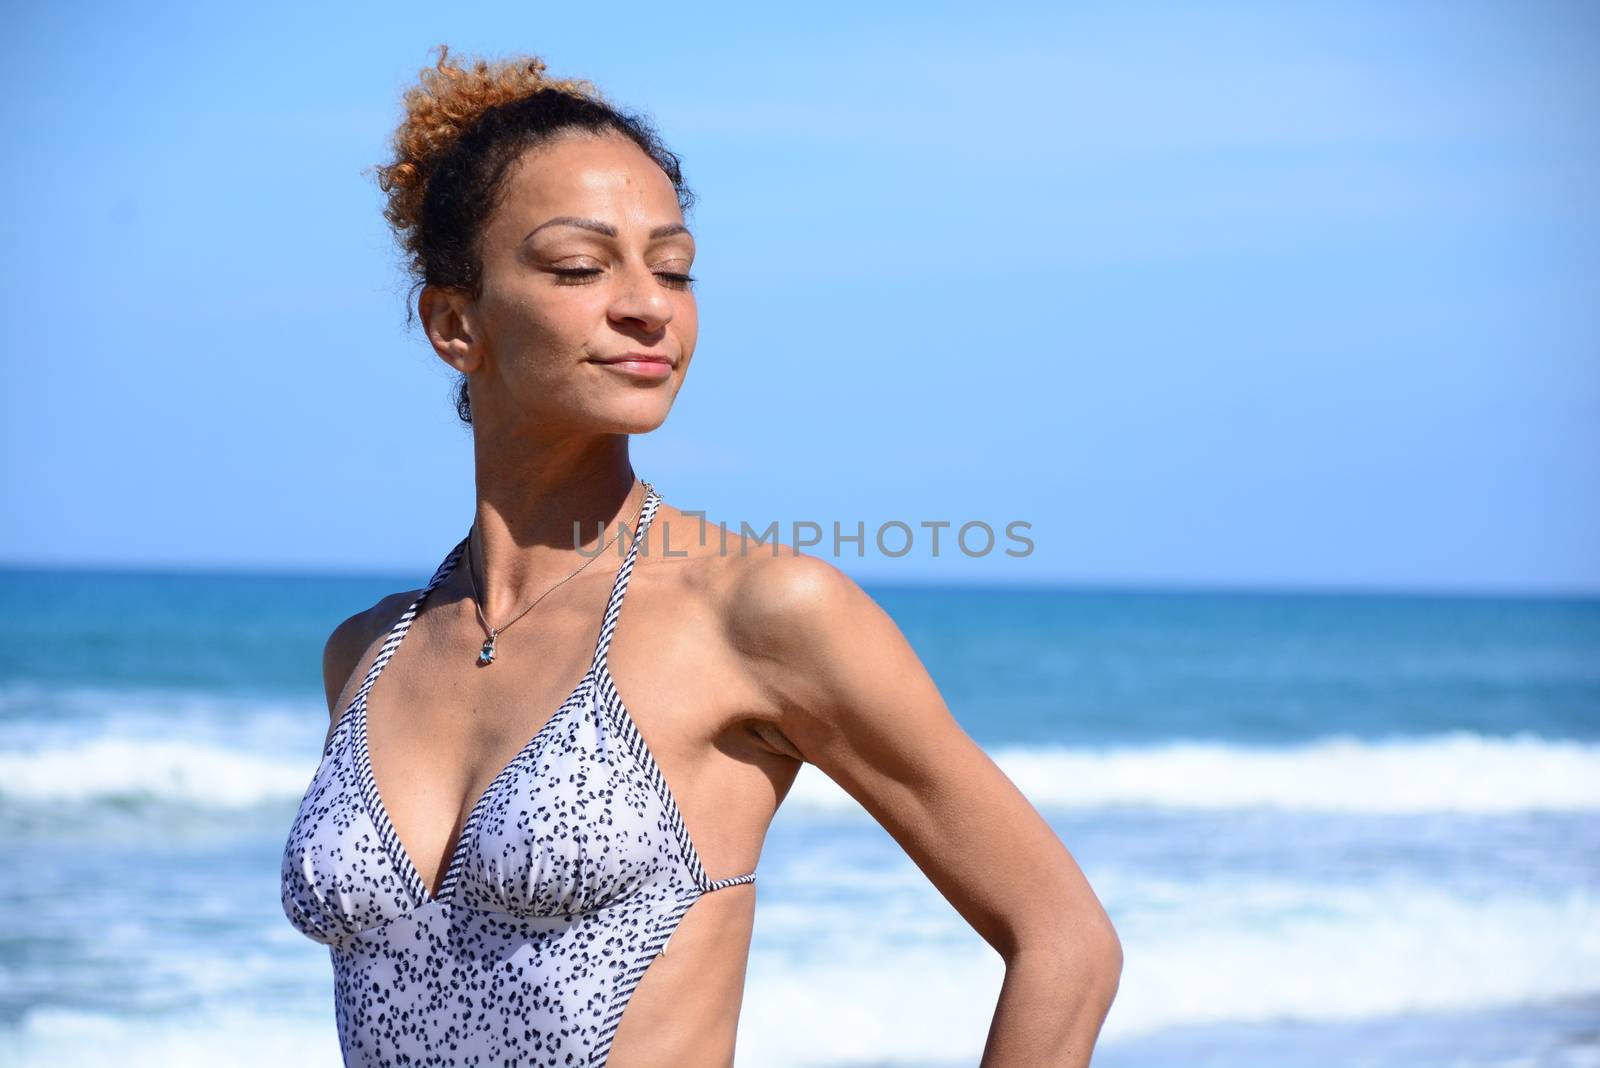 Photo shoot on the beach of a middle-aged woman in a sunny day